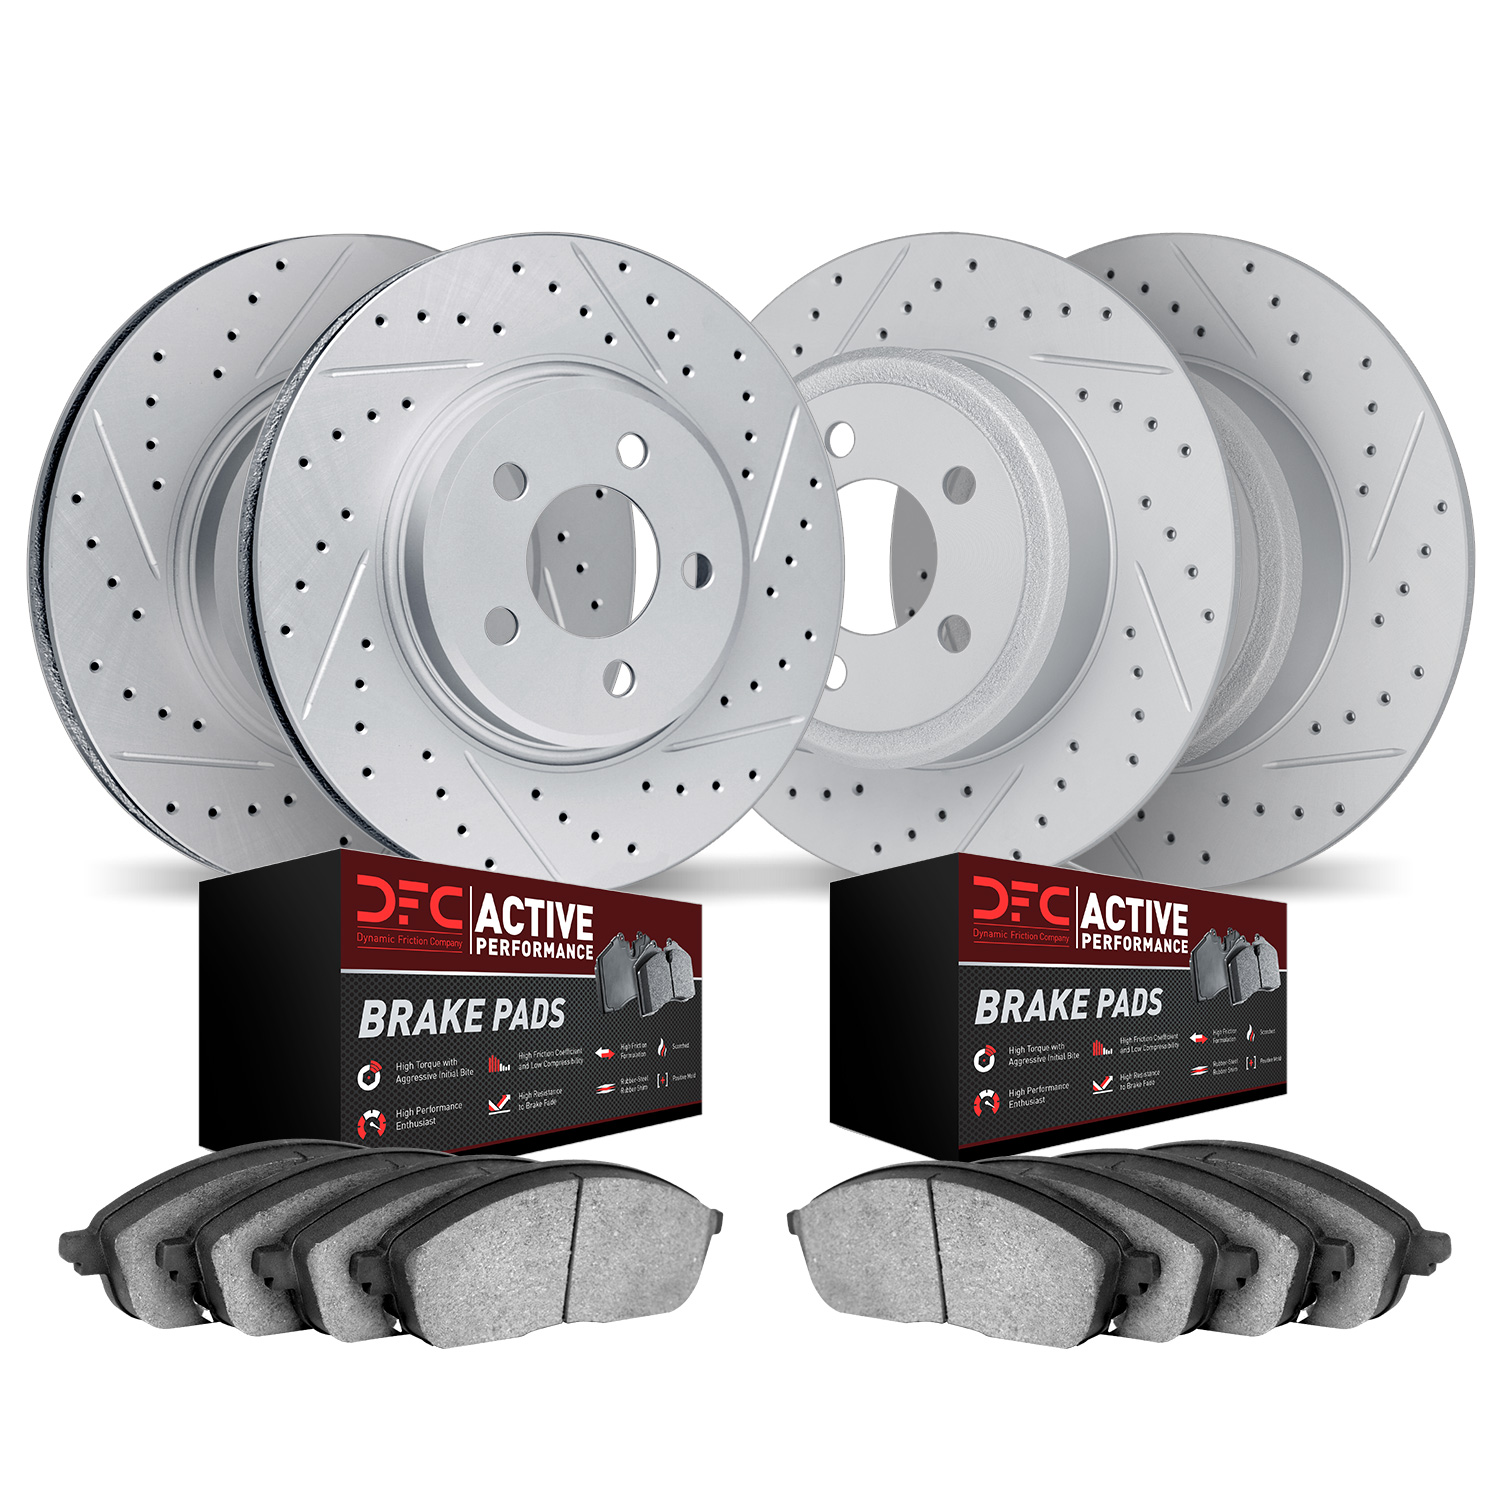 2704-59057 Geoperformance Drilled/Slotted Brake Rotors with Active Performance Pads Kit, 2005-2005 Acura/Honda, Position: Front